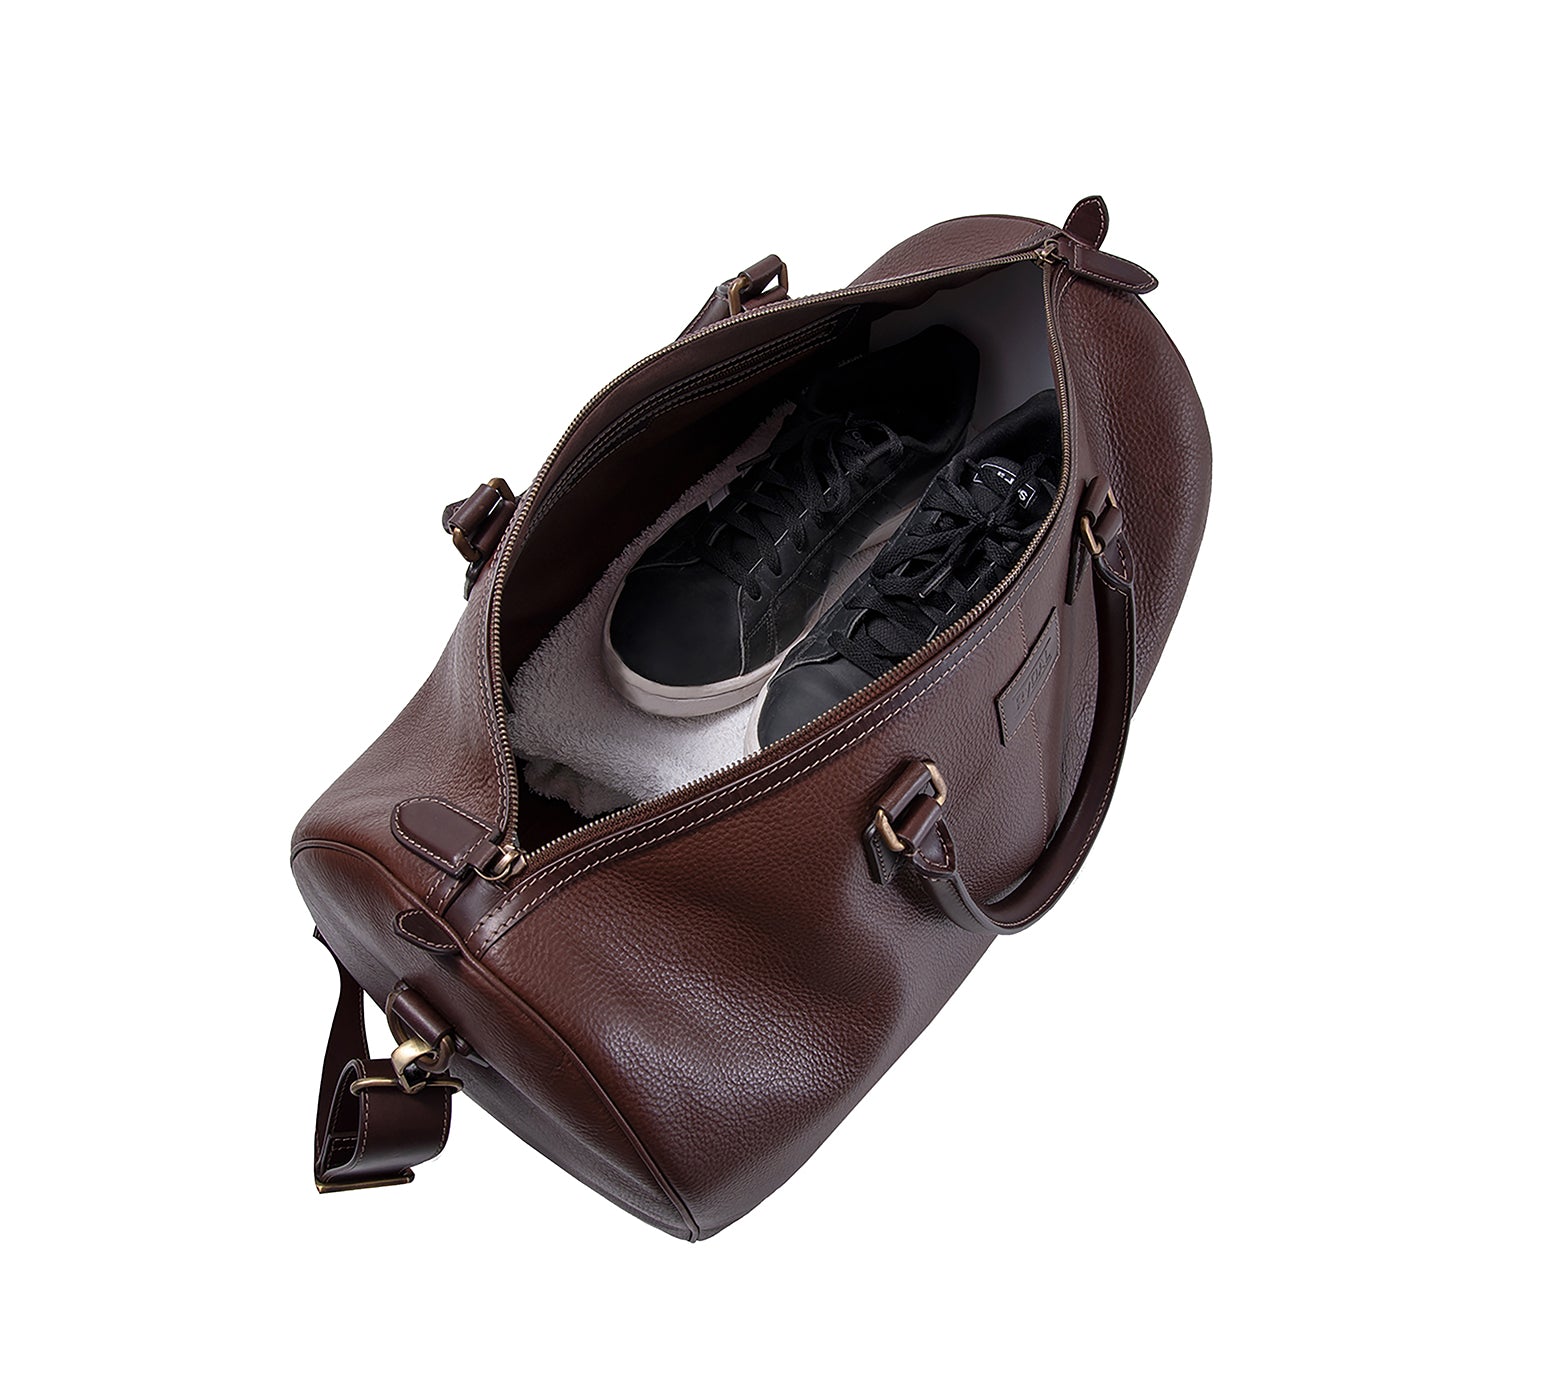 The Portland Mens Leather Travel Bag from Rydal in 'Dark Brown' showing interior with clothing.